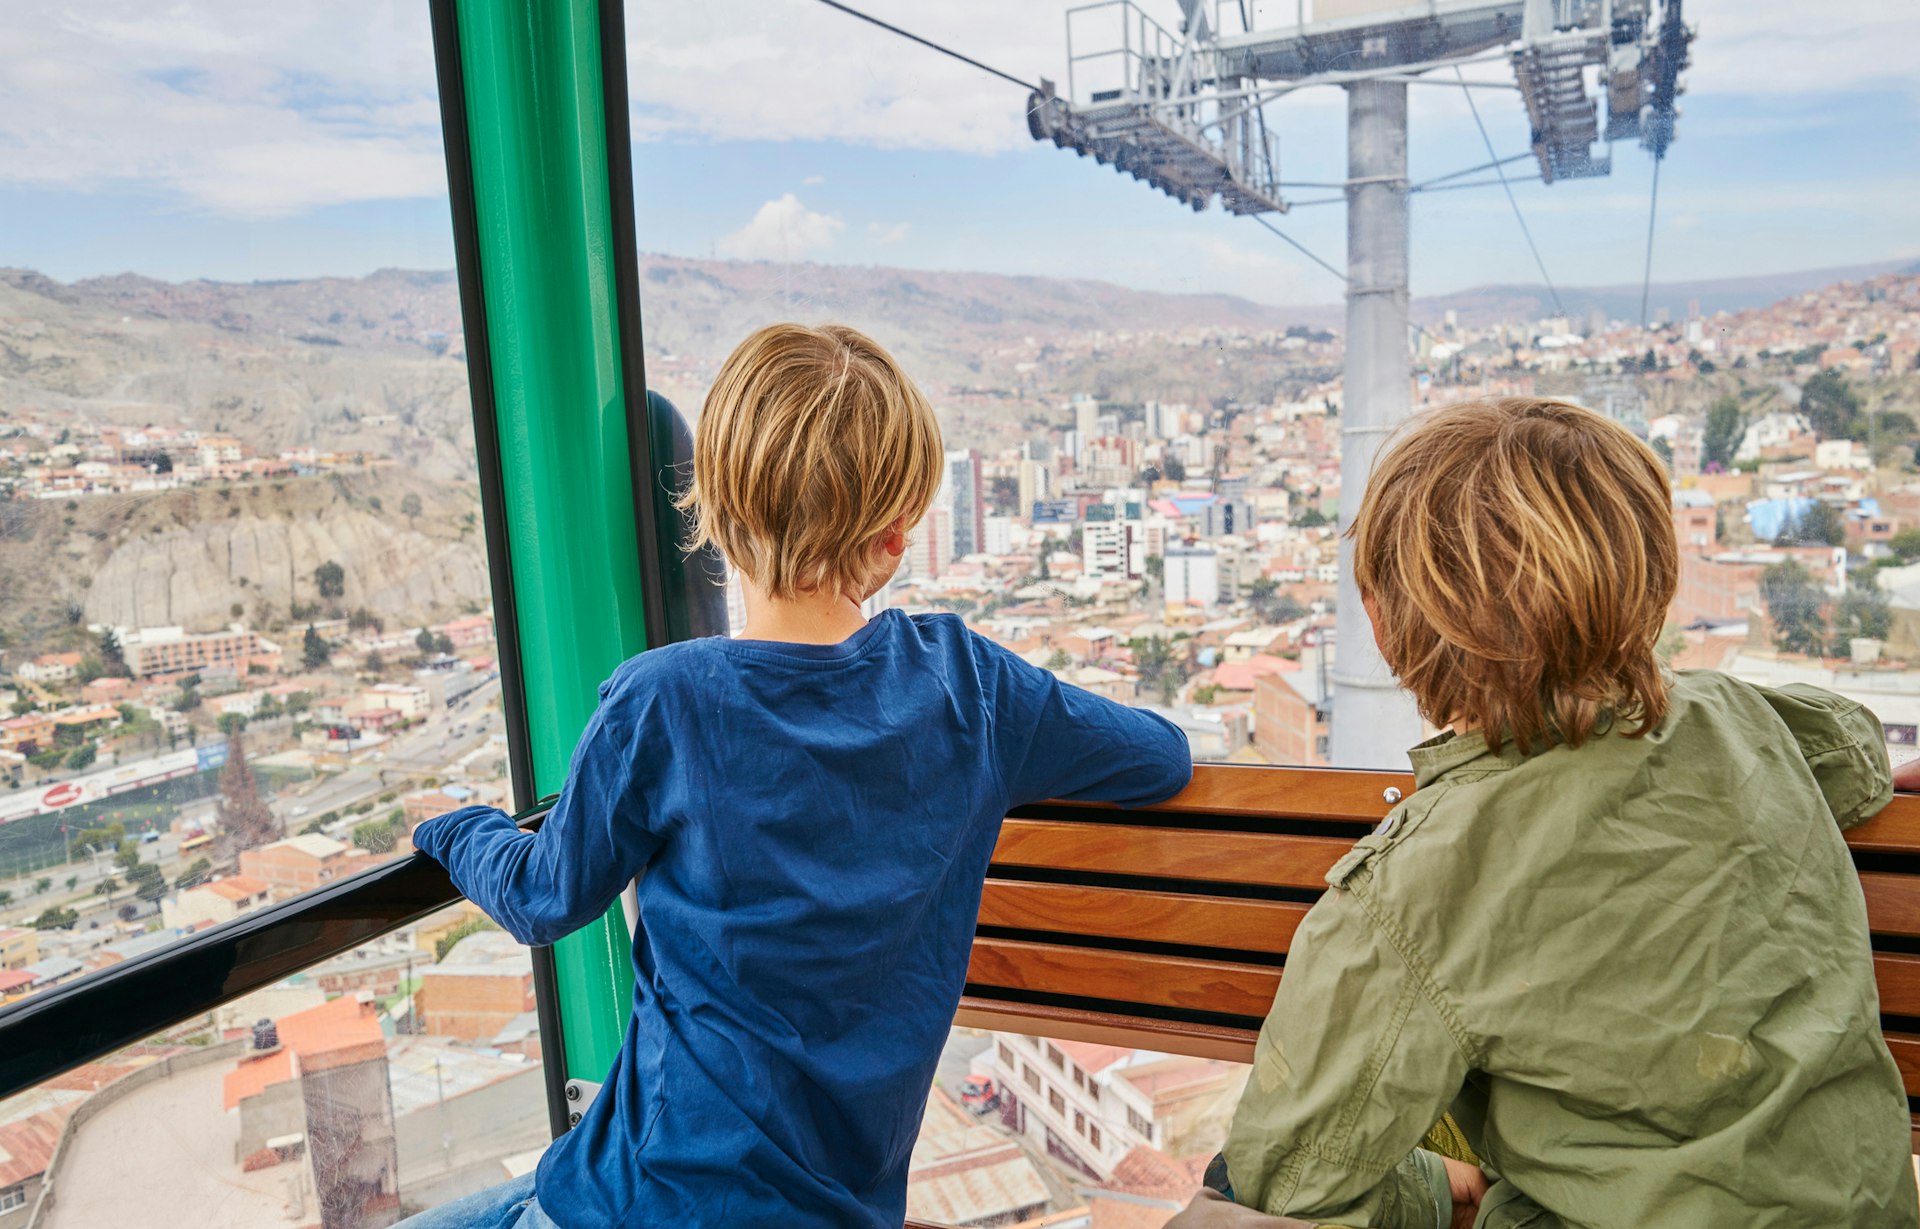 Two young boys looking down on La Paz from a cable car, Bolivia